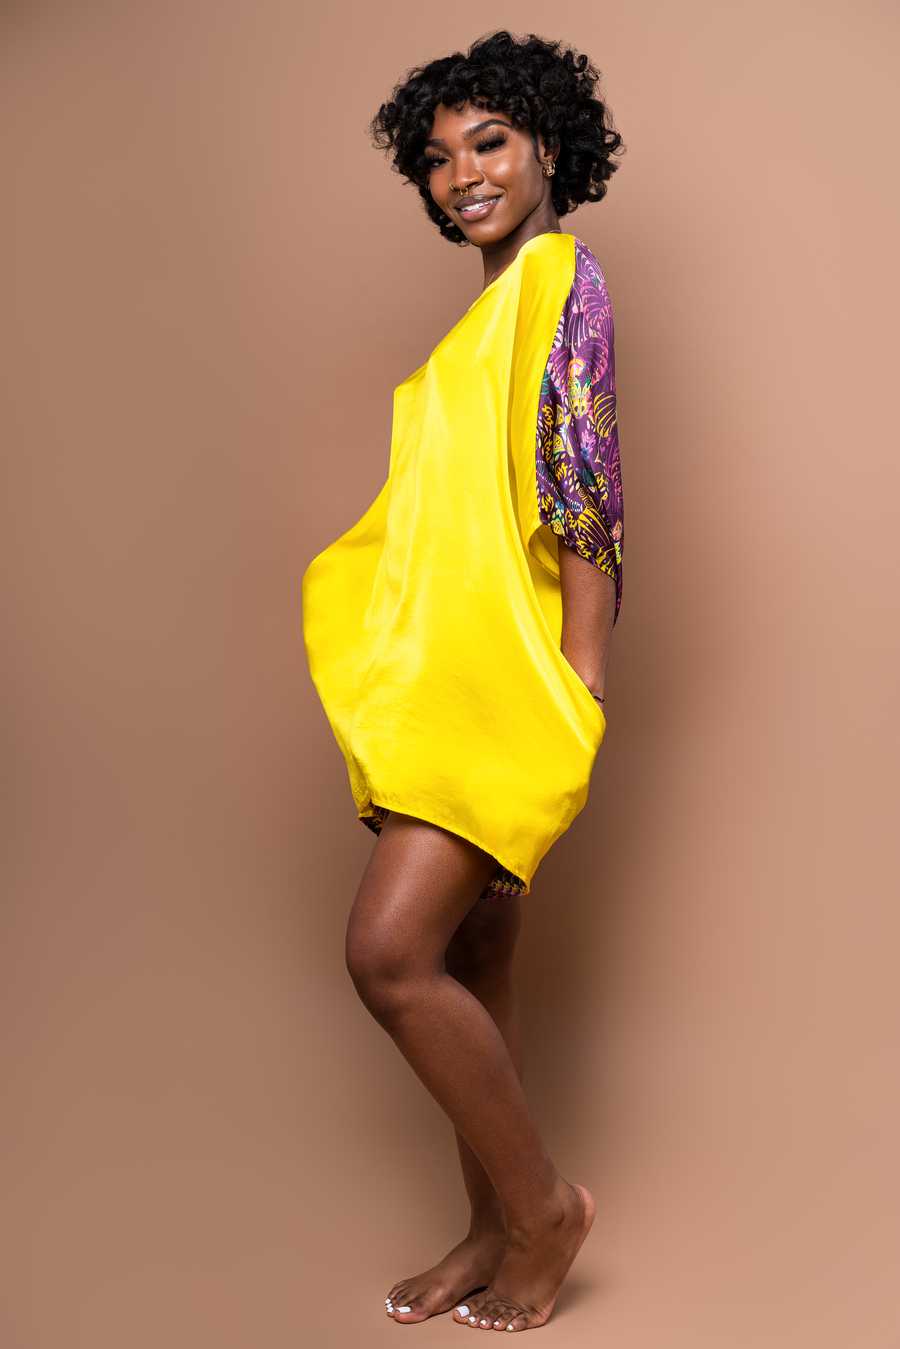 Tunde Tunic Mini Dress in Silk - Sophisticated Soul of Gold - Furkat & Robbie